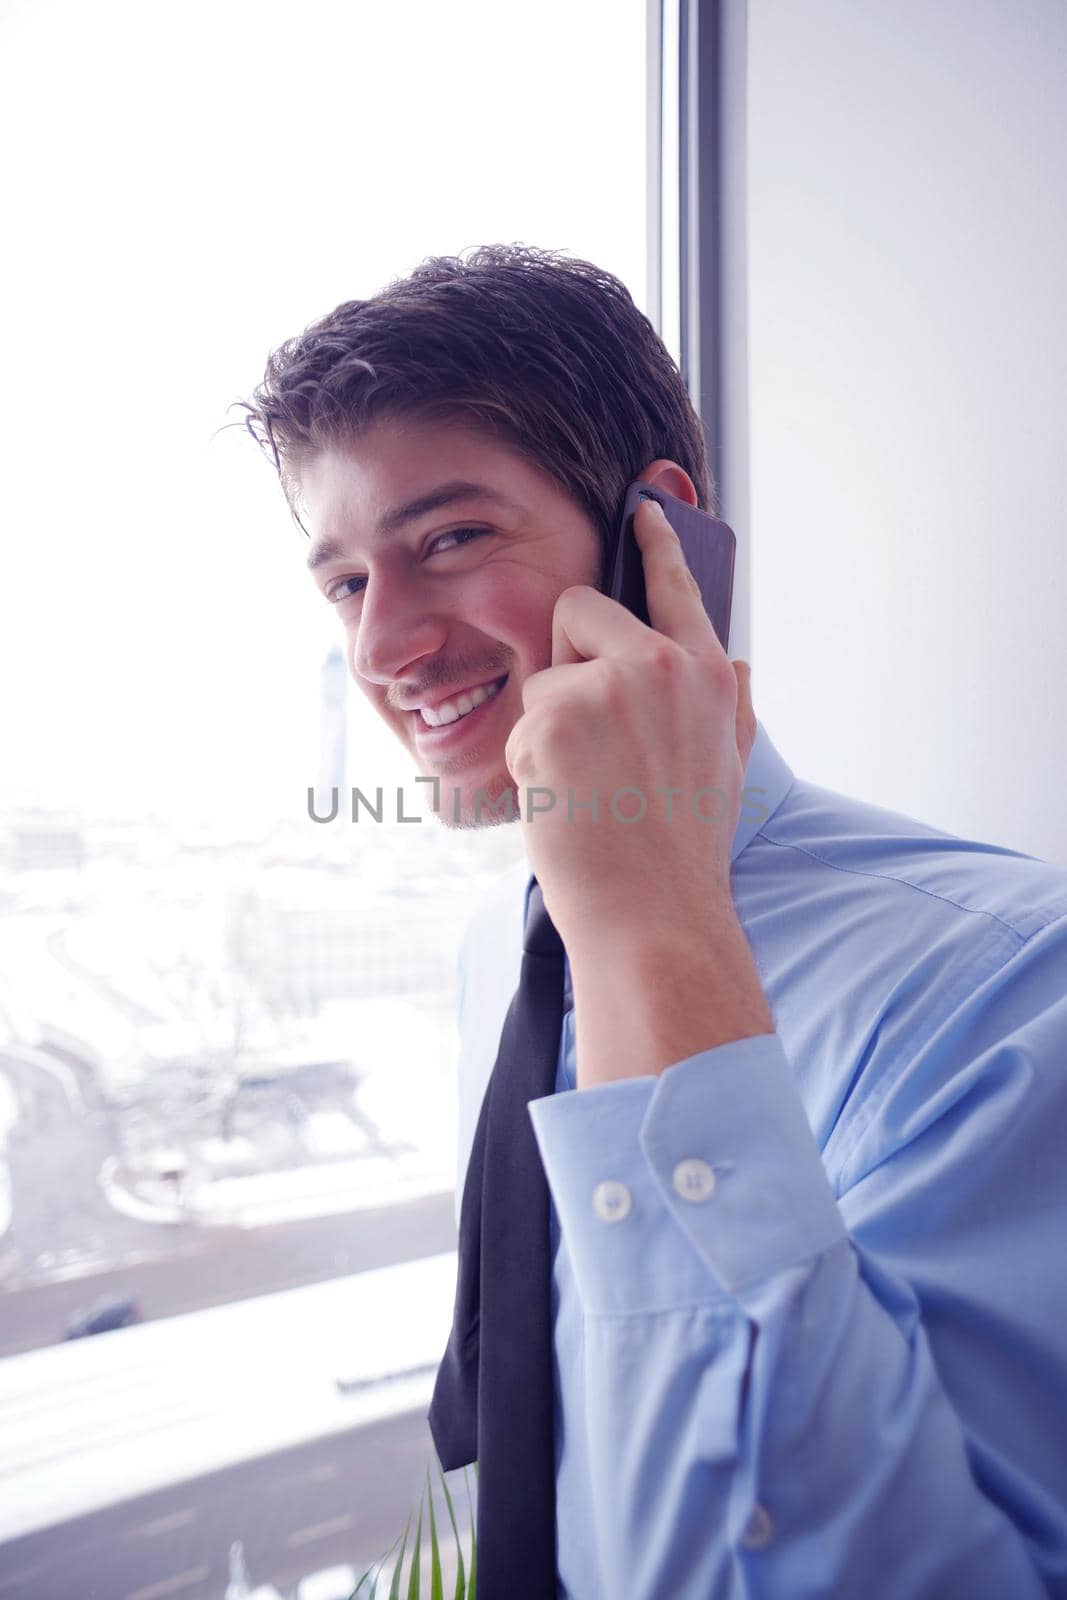 business man talking by cellphone in office